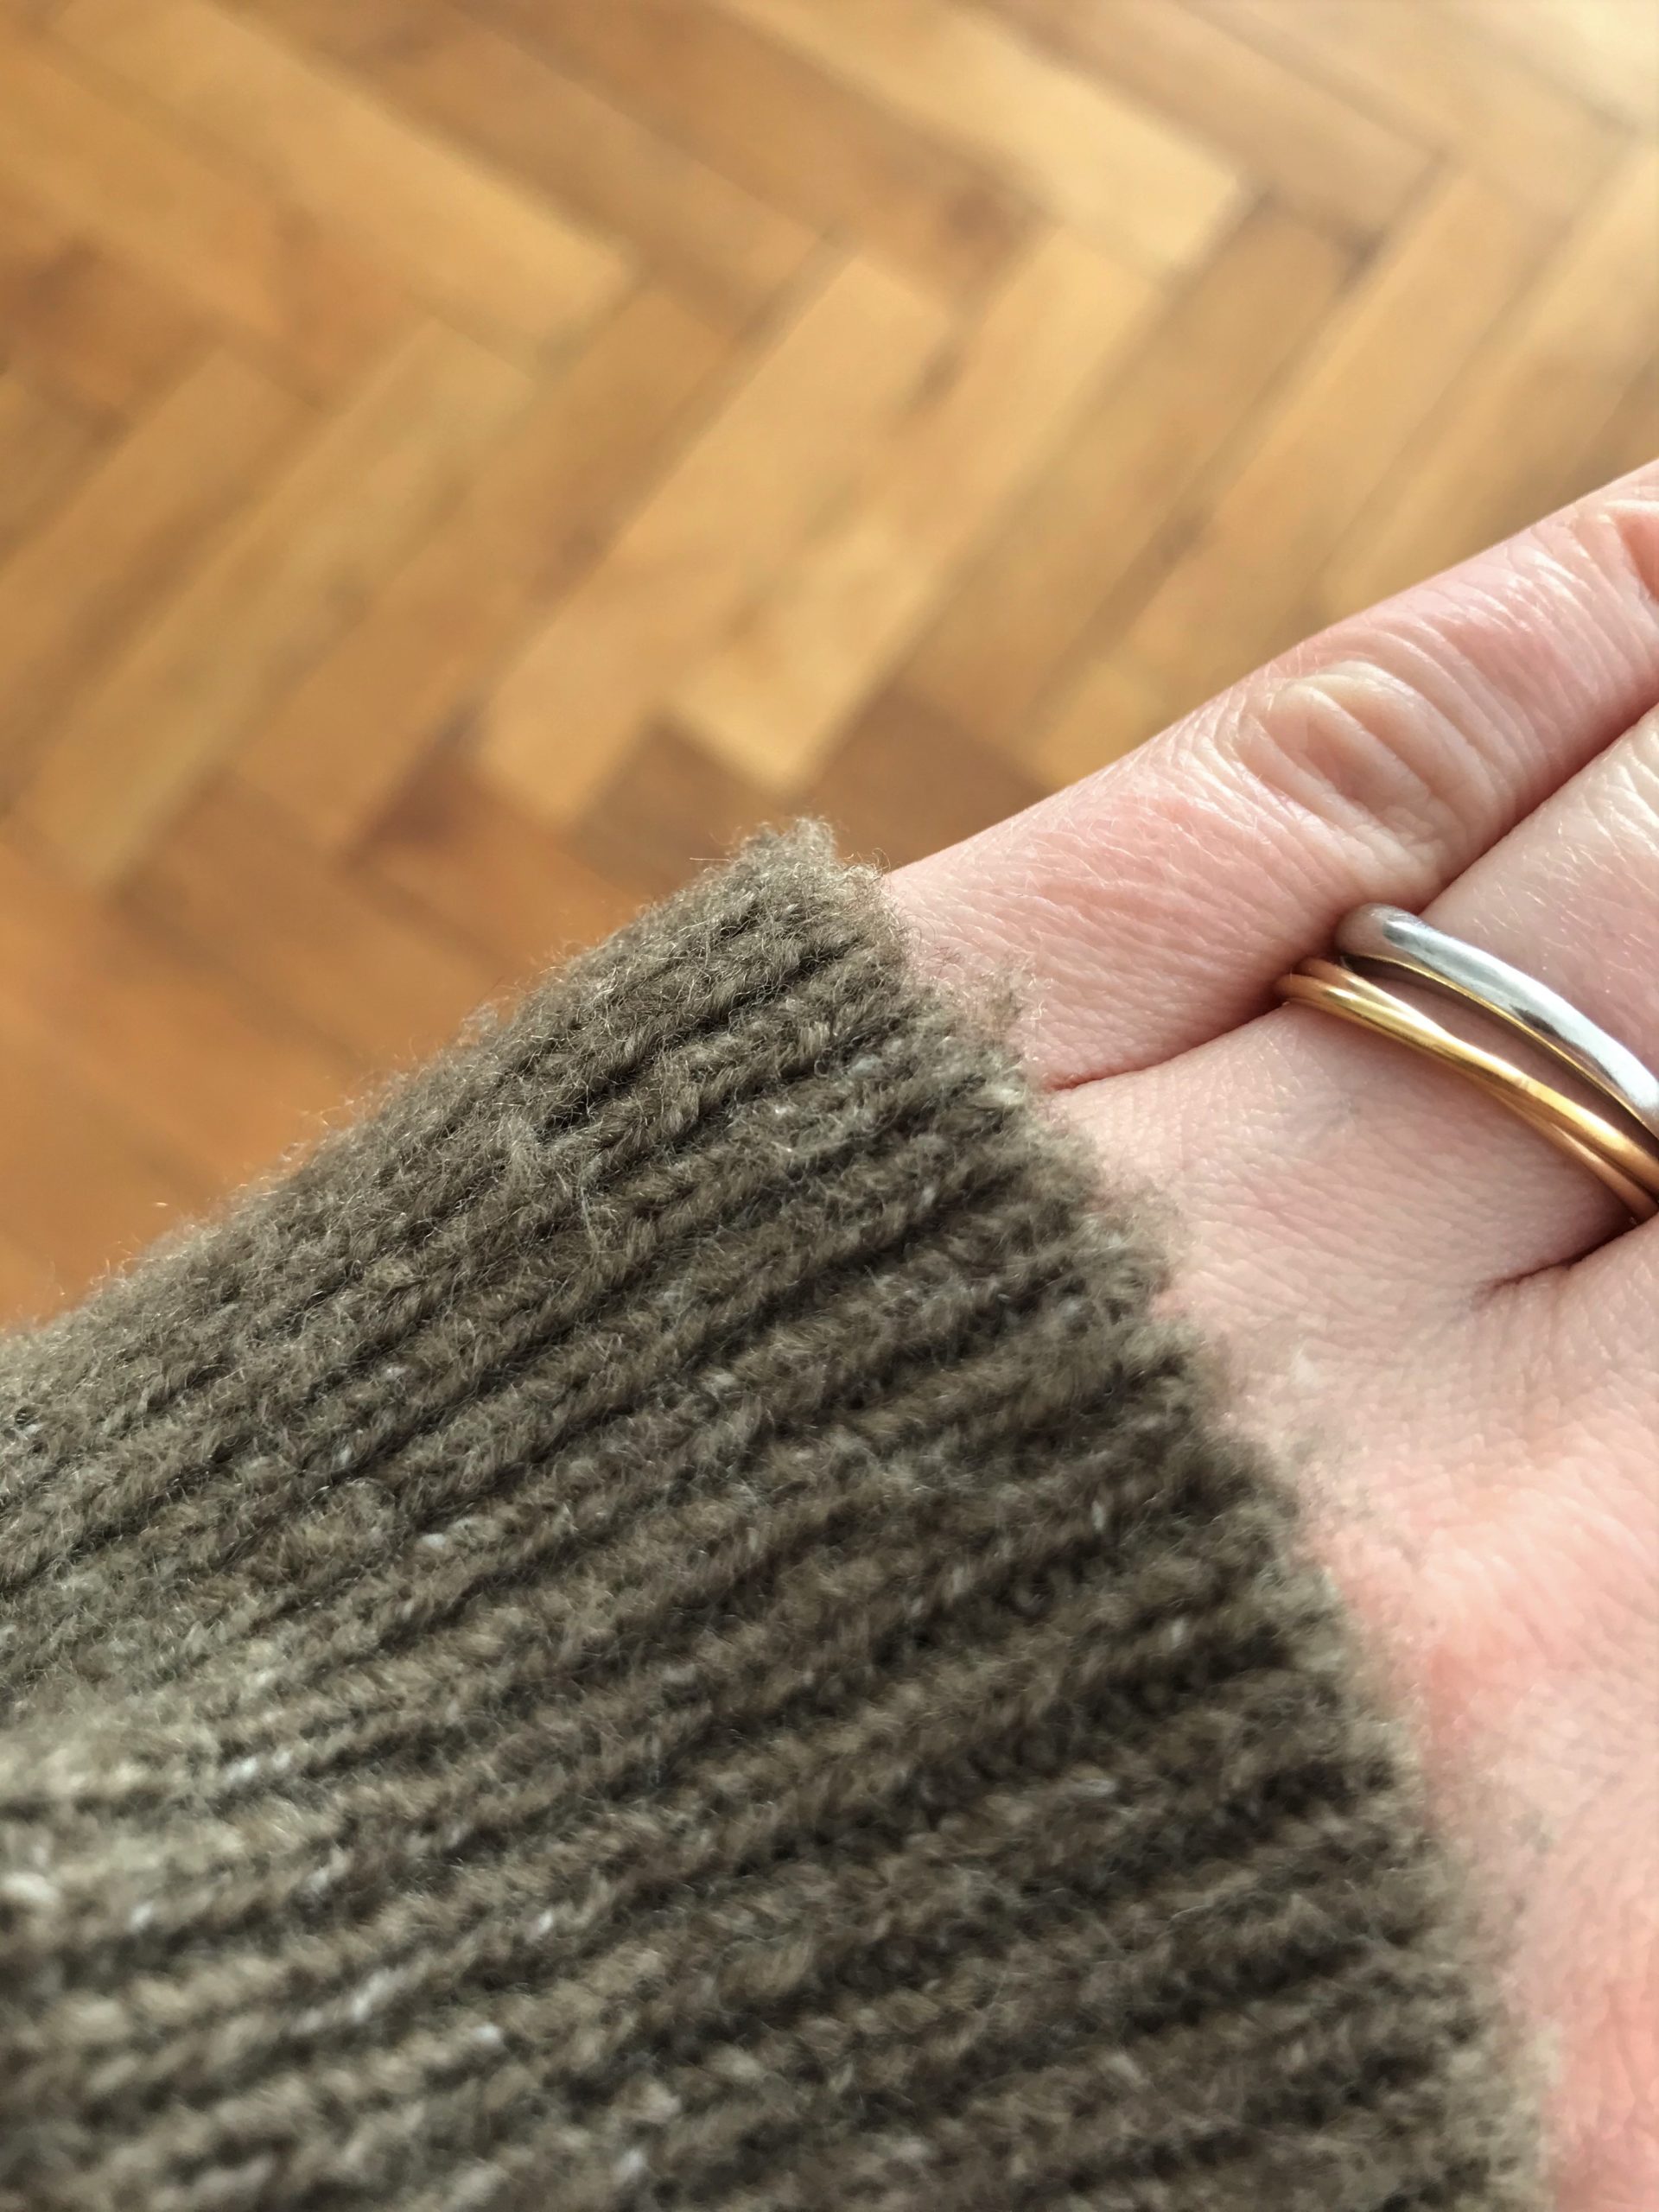 Gold & Silver Rings, Minimalist Jewelry, Beige Aesthetic, Slow Living, Fashion, Style, Accessories | RG Daily Blog